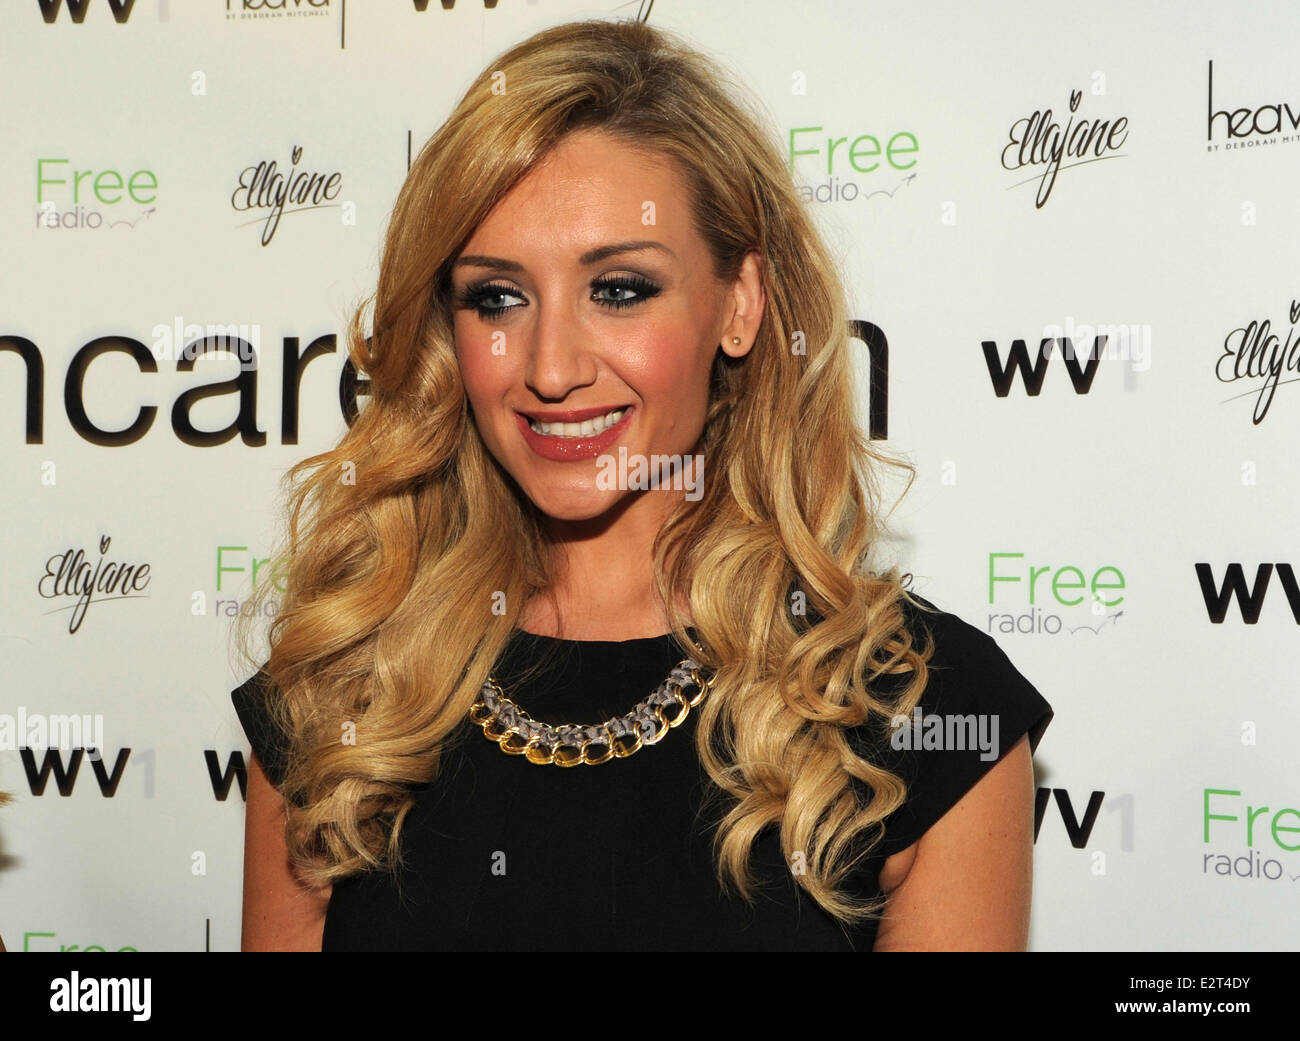 Heaven Health & Beauty - launch party held at the WV1 Bar  & Grill  Featuring: Catherine Tyldesley Where: Wolverhampton, United Kingdom When: 19 Feb 2013 Stock Photo